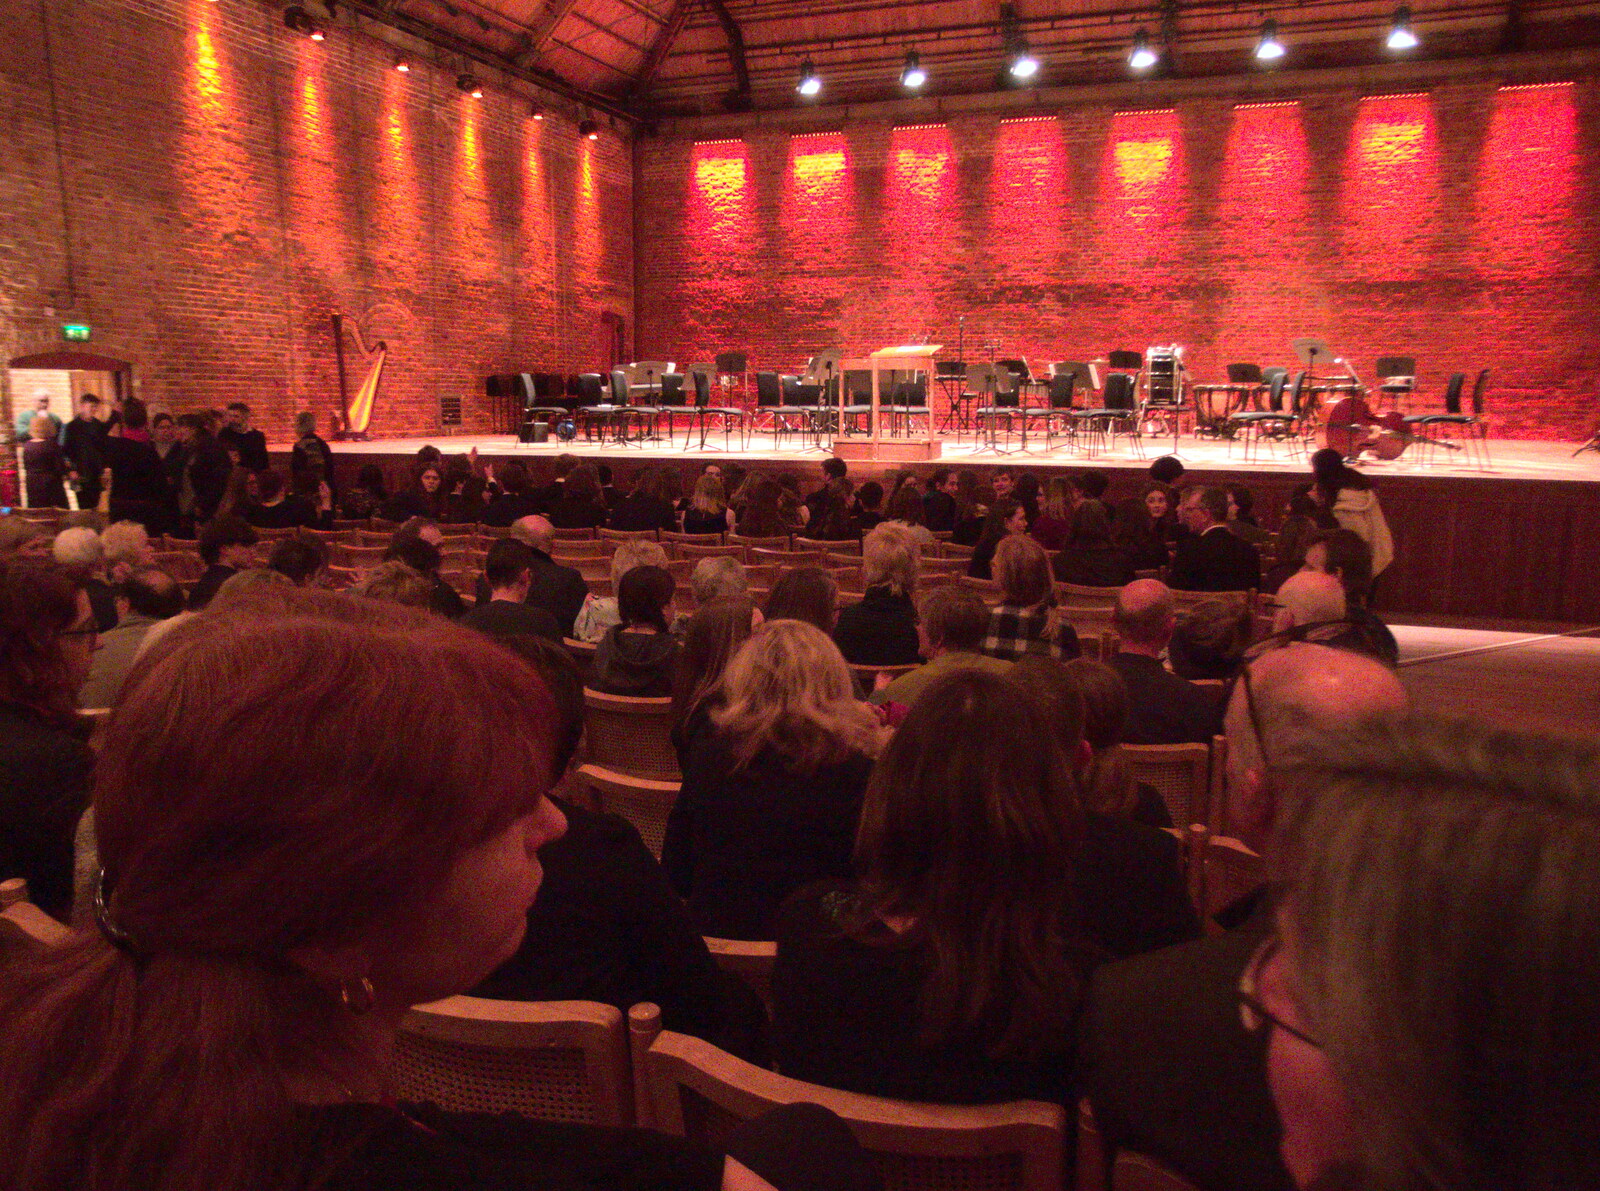 The stage is set from Fred and the Orchestra, Snape Maltings, Suffolk - 5th April